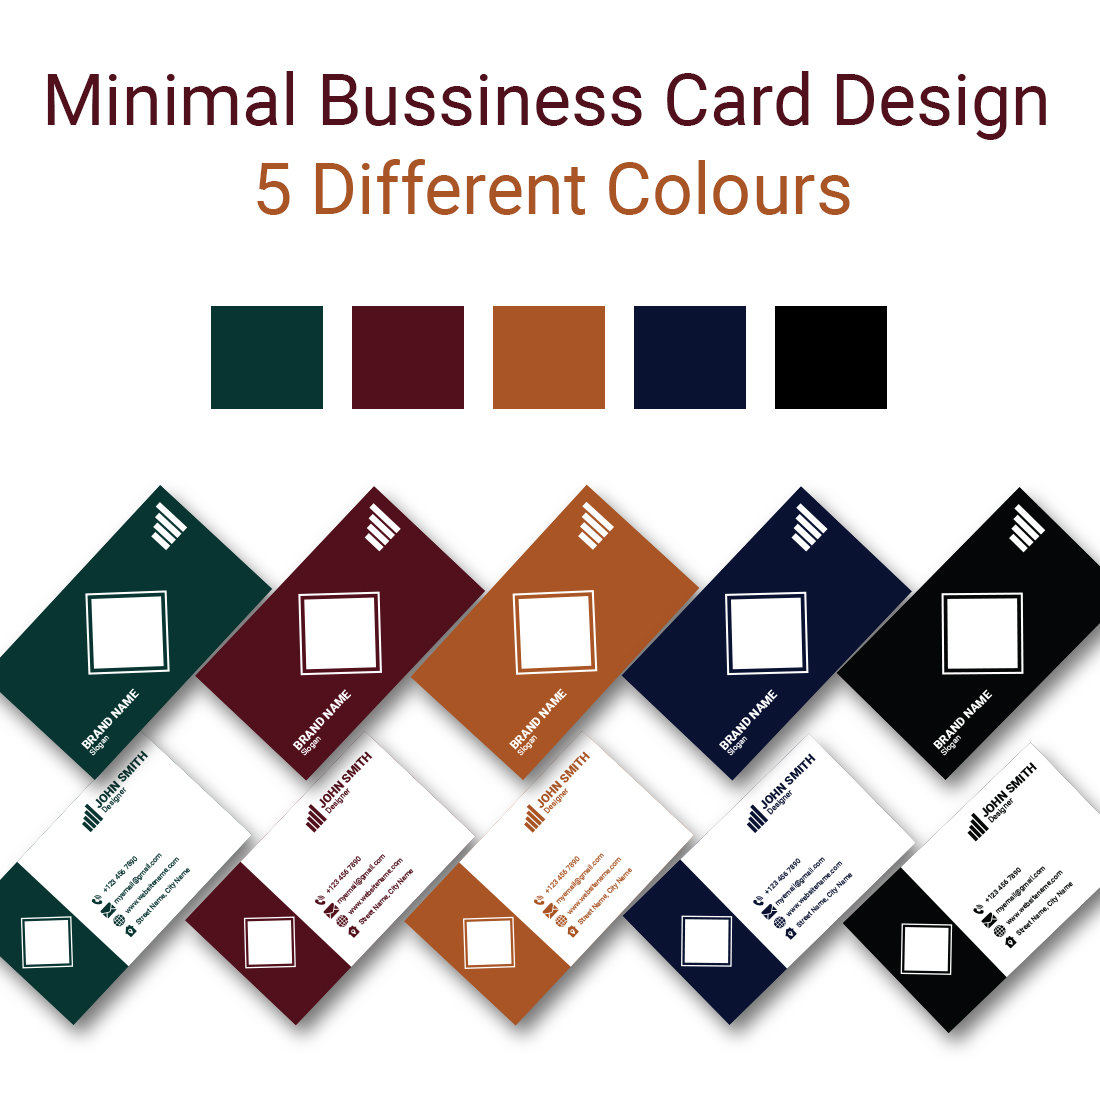 Minimal, Simple & Attractive Business Card Design cover image.